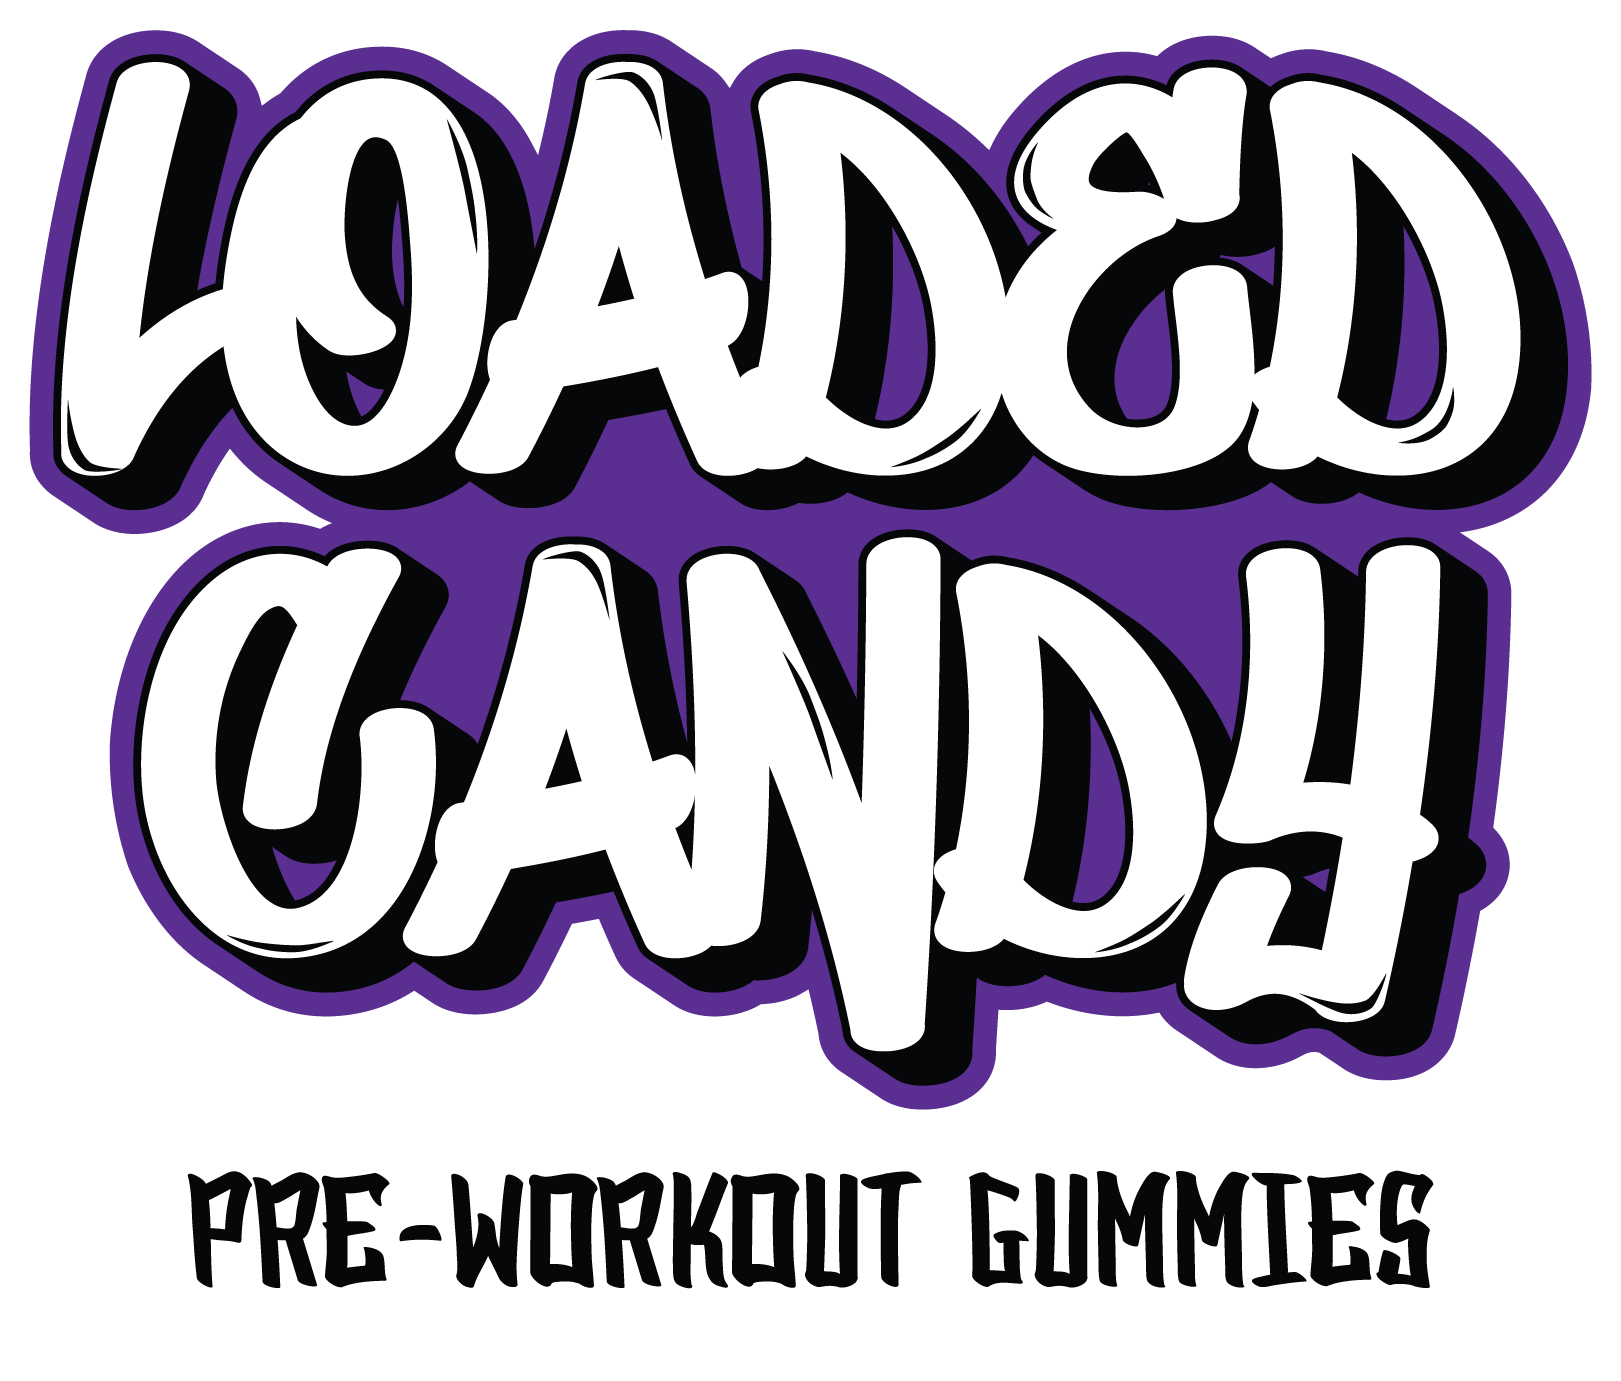 Loaded Candy Pre-Workout Gummies